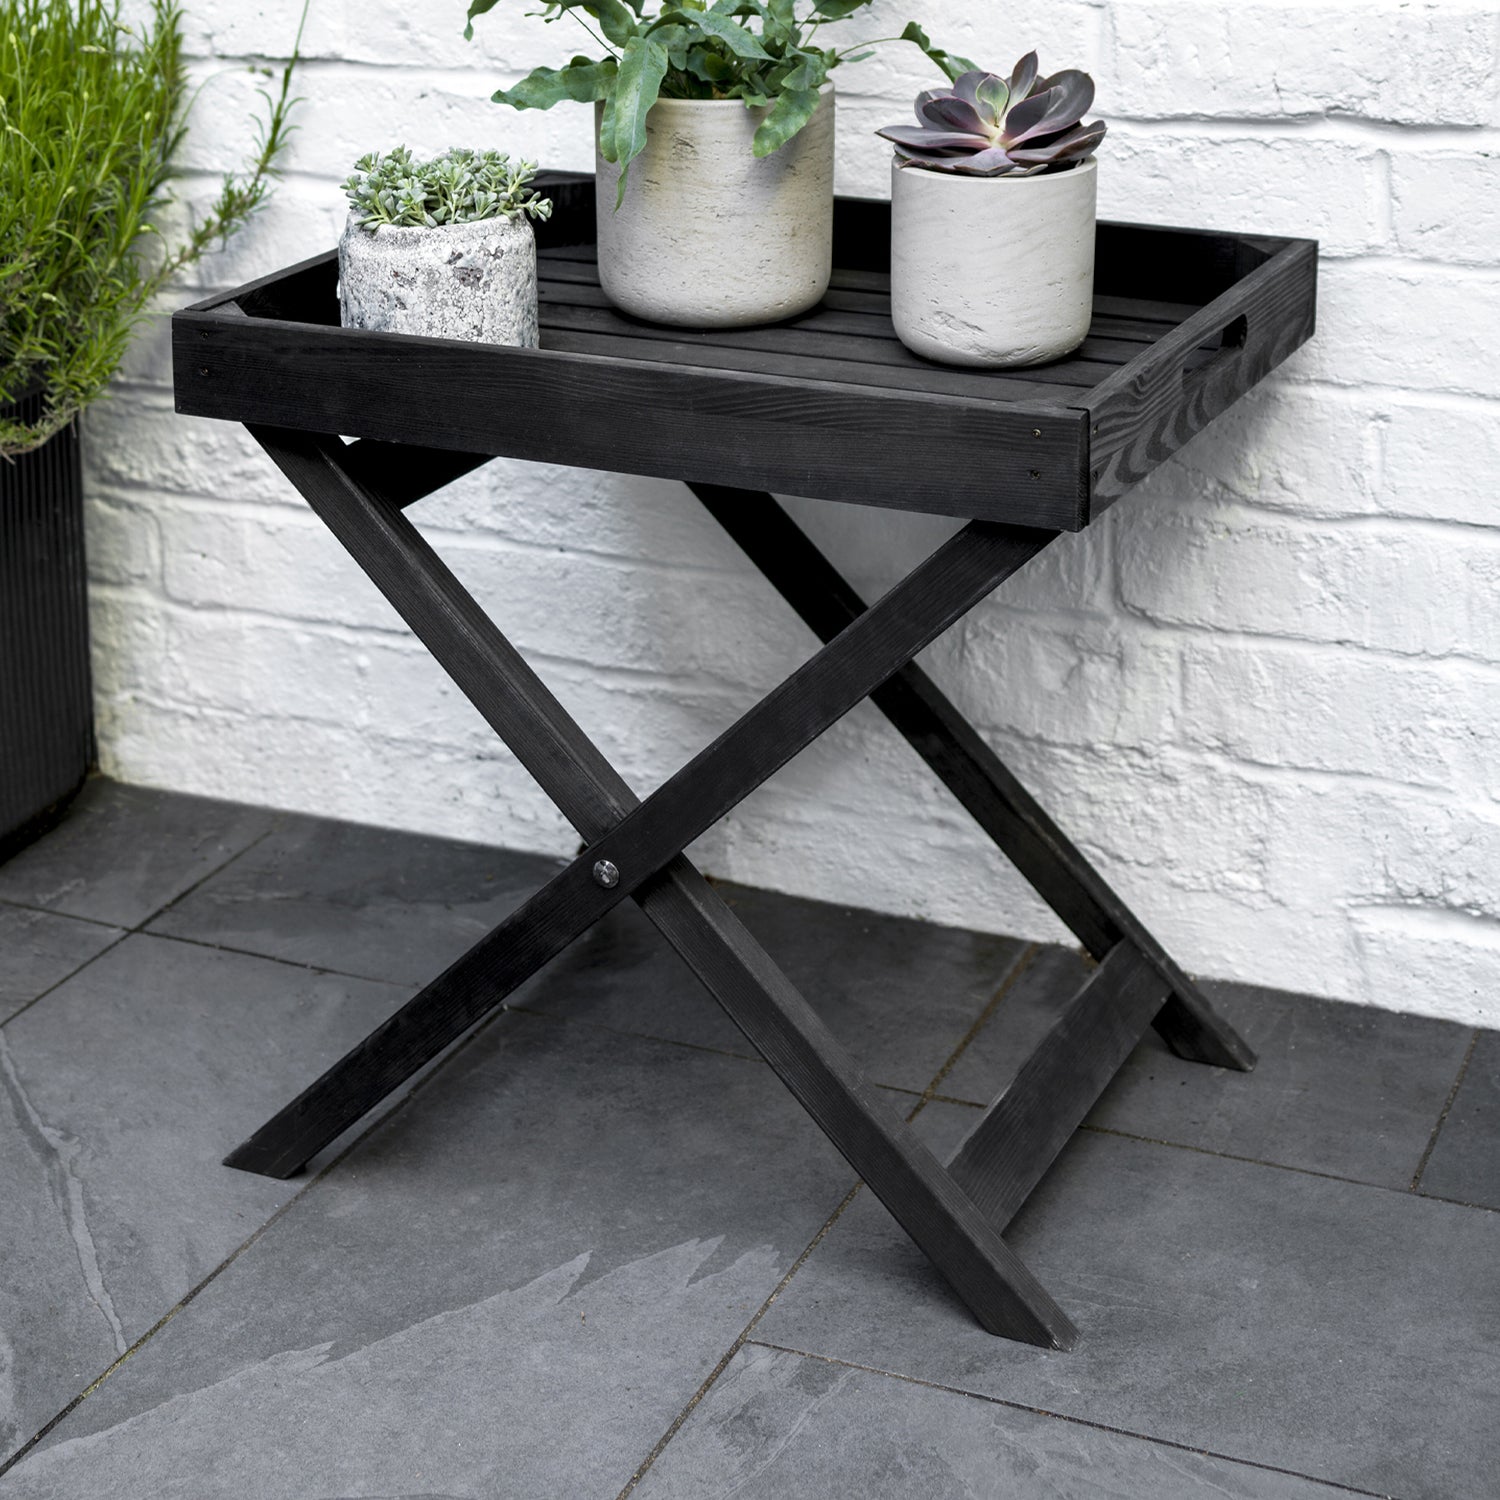 Moreton Outdoor Tray Table Spruce by Garden Trading